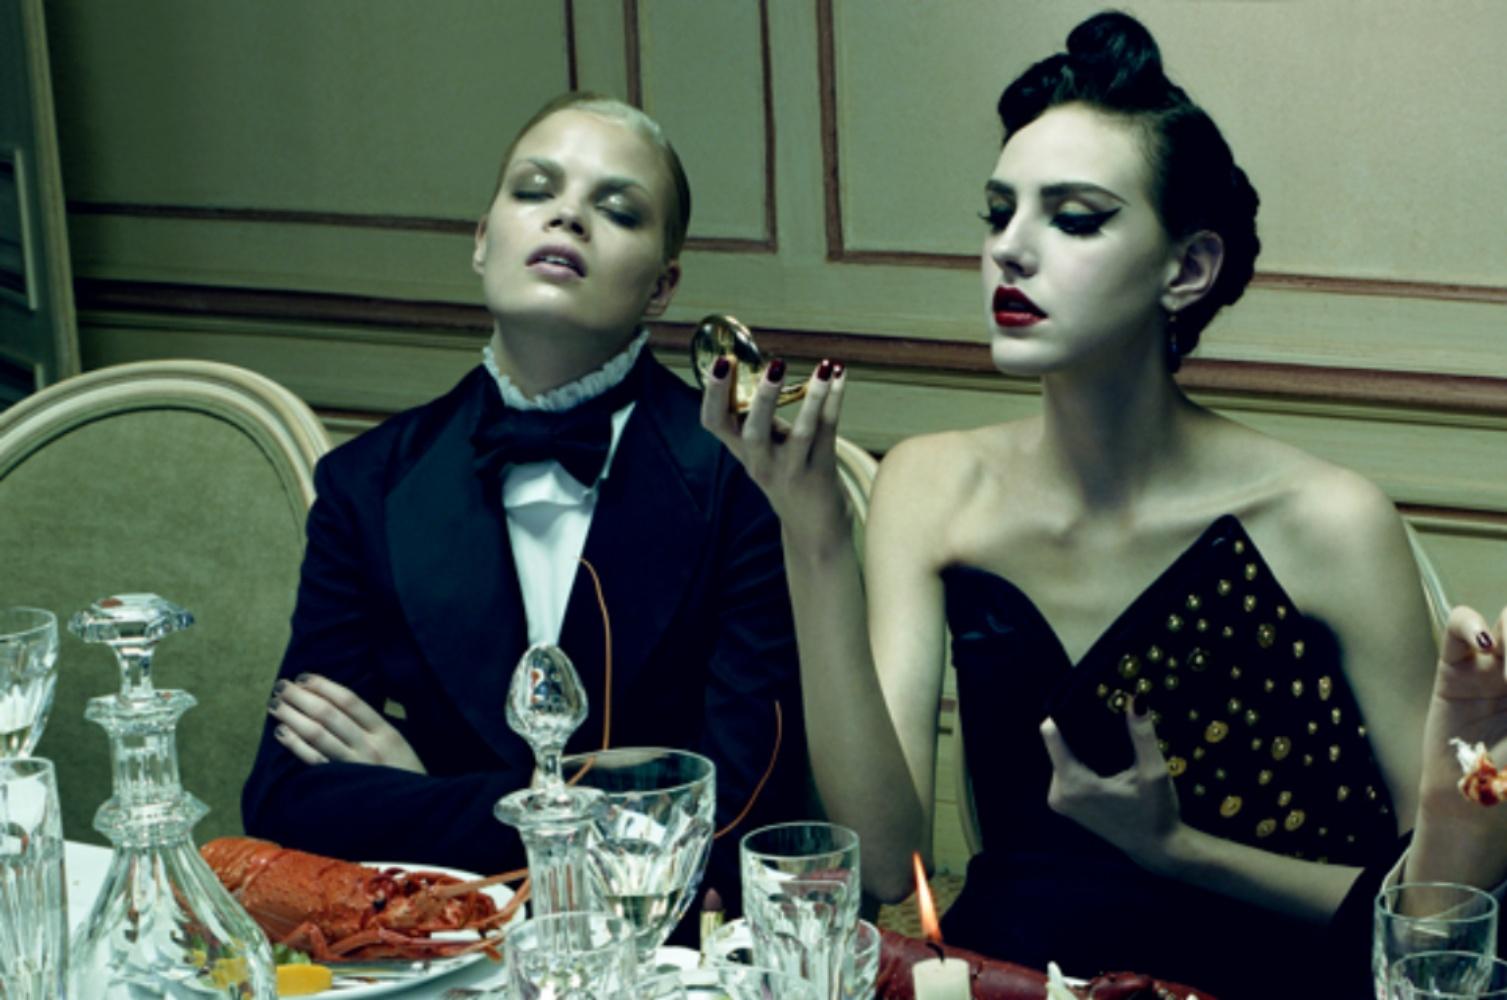 Miles ALDRIDGE (*1964, Great Britain)
Dinner Party #3, 2009
Chromogenic print
Image 102 x 152.5 (40 1/8 x 60 in.) 
Sheet 114 x 164.5 cm (44 7/8 x 64 3/4 in.)
Edition of 6, plus 2 AP; Ed. 1/6
Print only

A fiercely original photographer, Miles